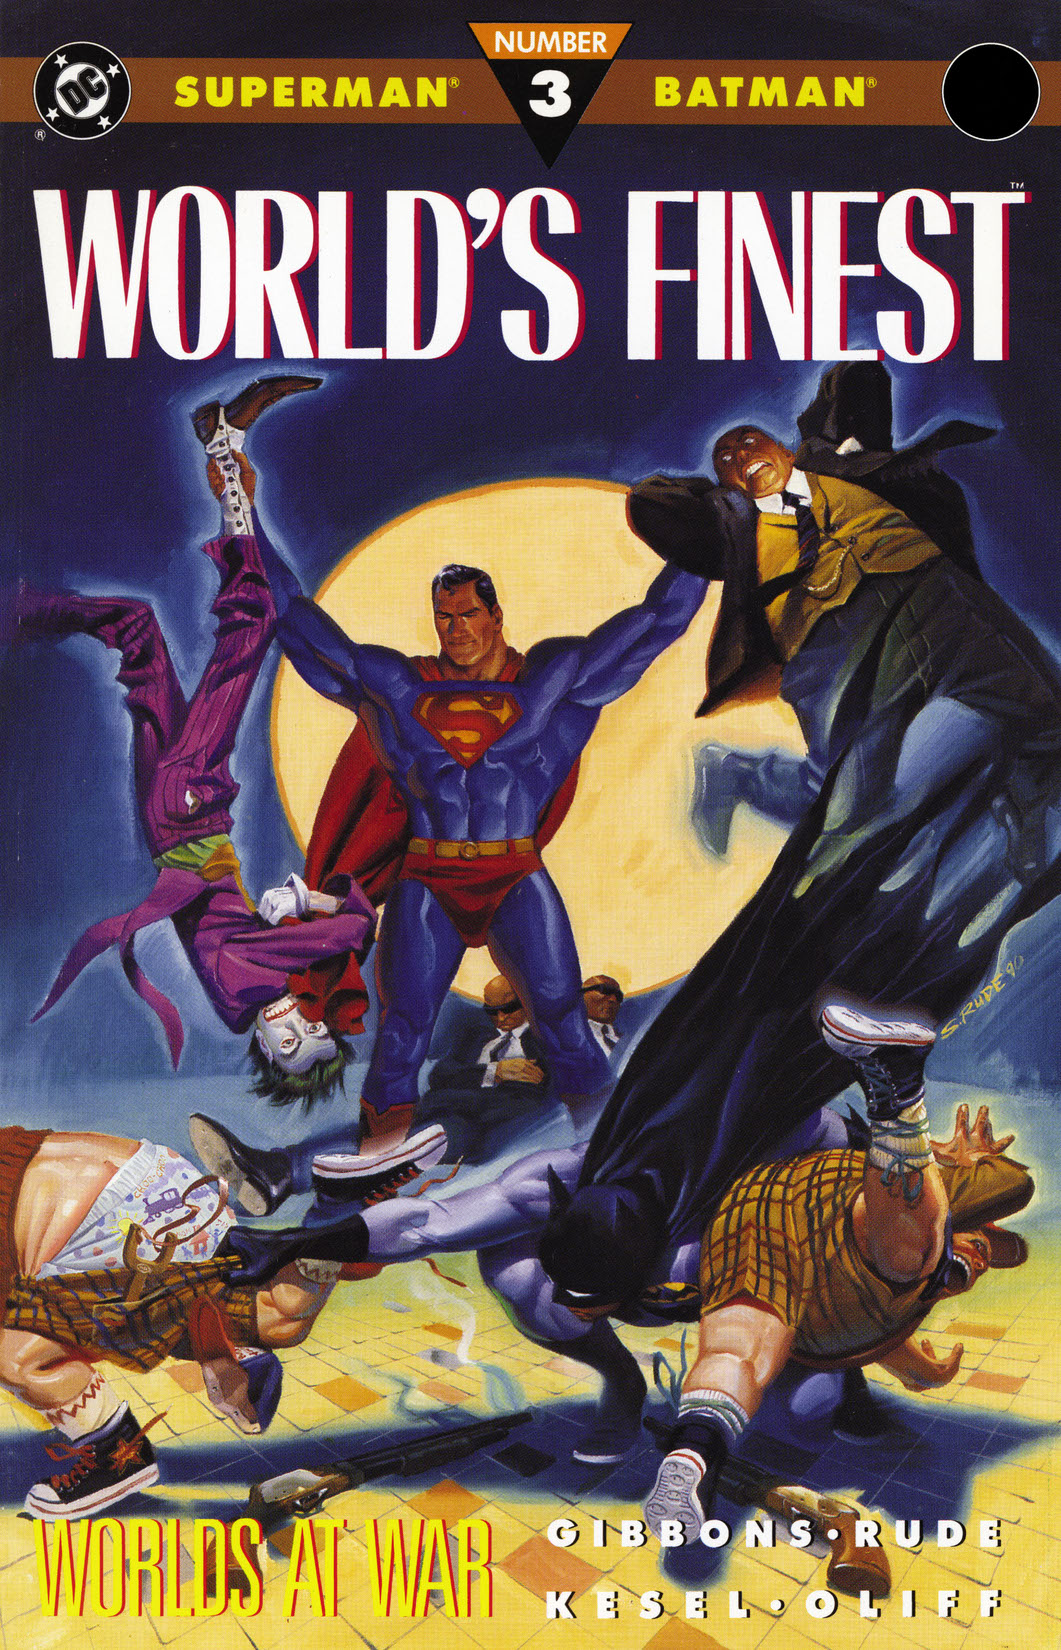 World's Finest (1990-) #3 preview images